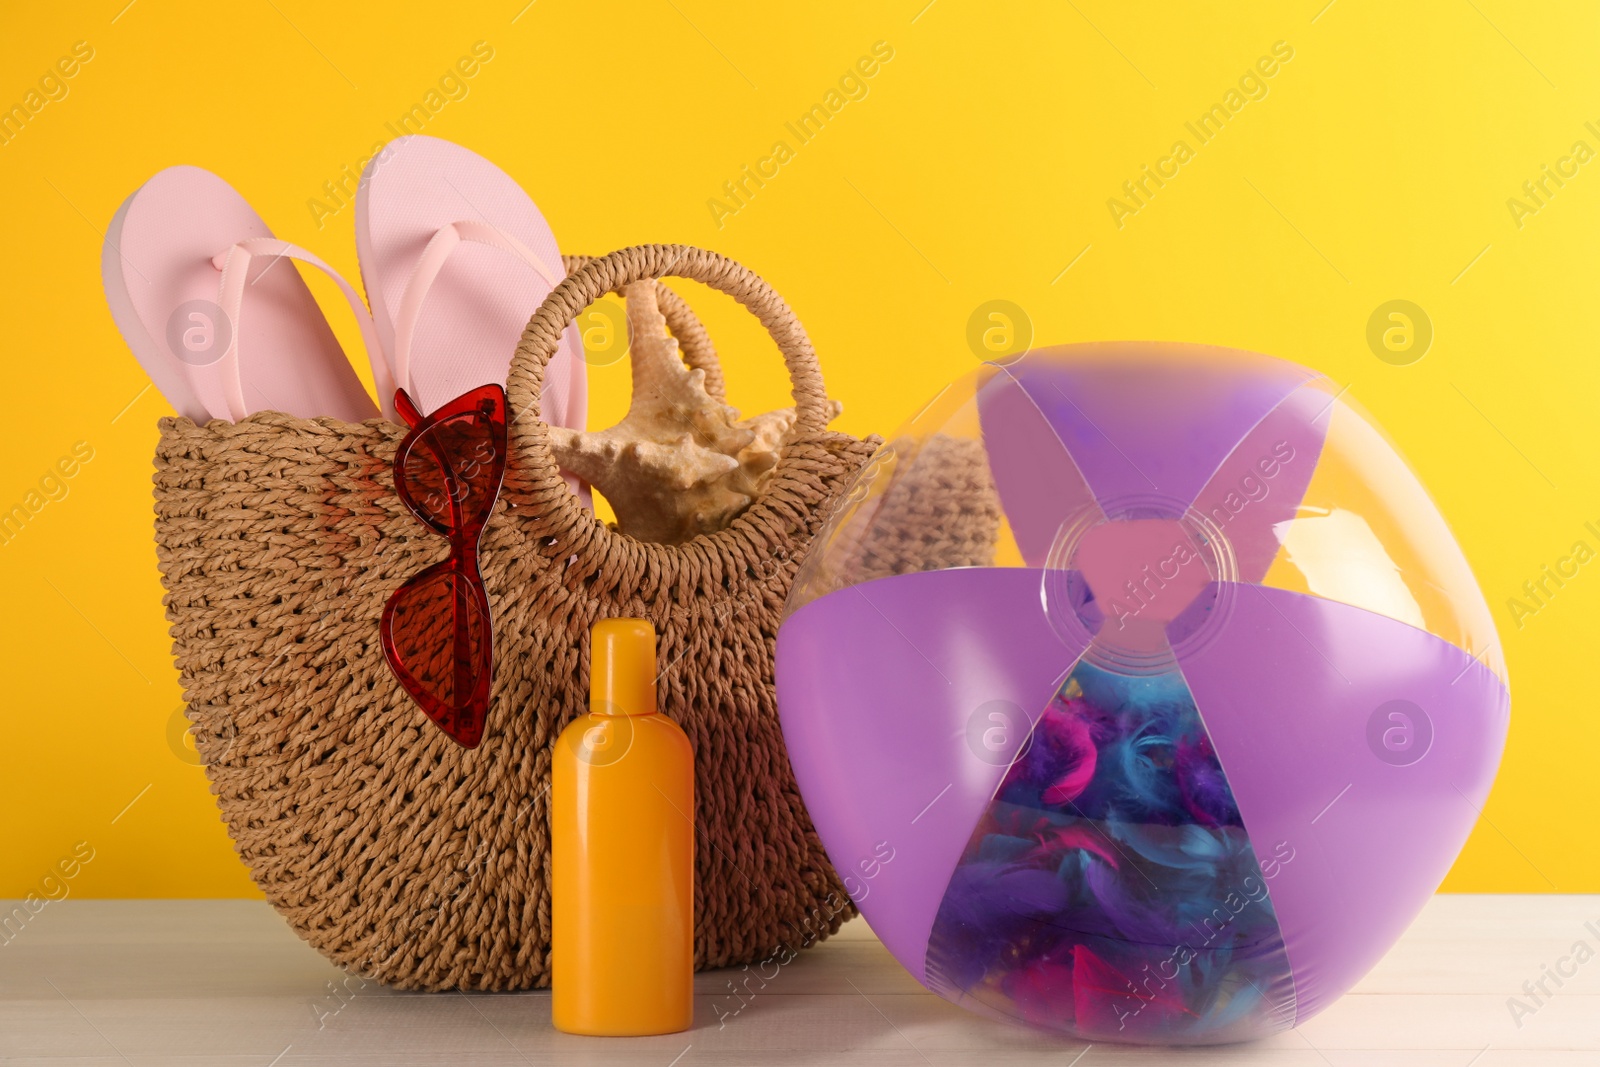 Photo of Bright inflatable ball and bag with beach accessories on white wooden table against yellow background